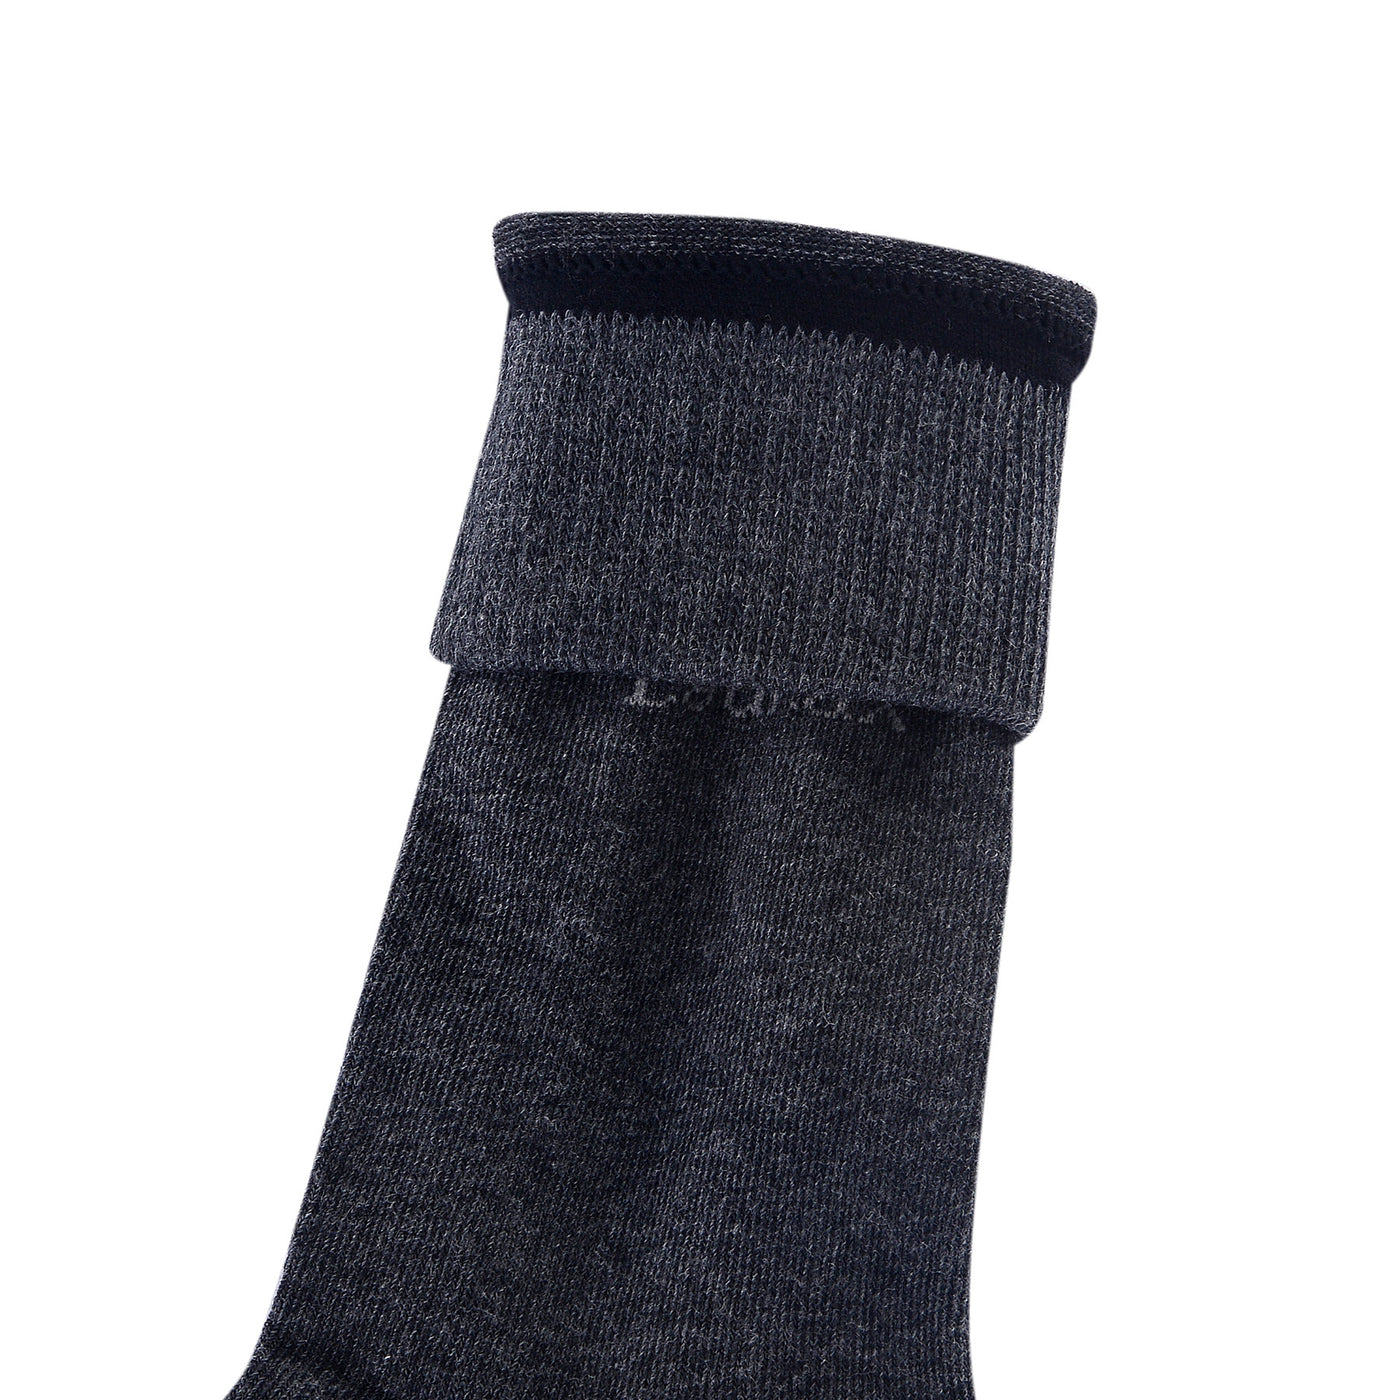 High Quality Formal Finest Combed Cotton Socks In Anthracite